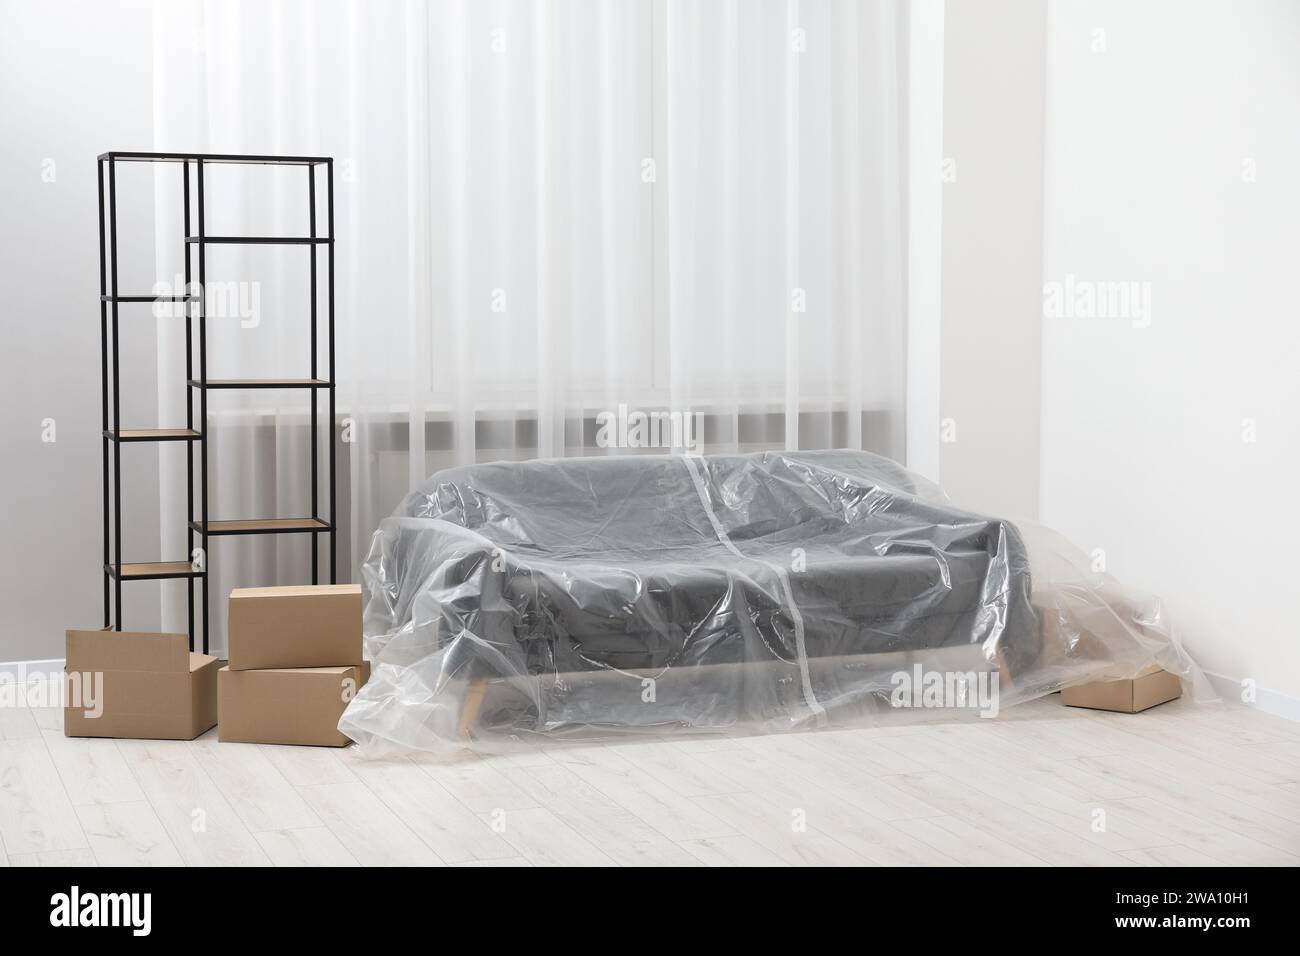 Stylish sofa covered with plastic film, shelving unit and boxes at home Stock Photo